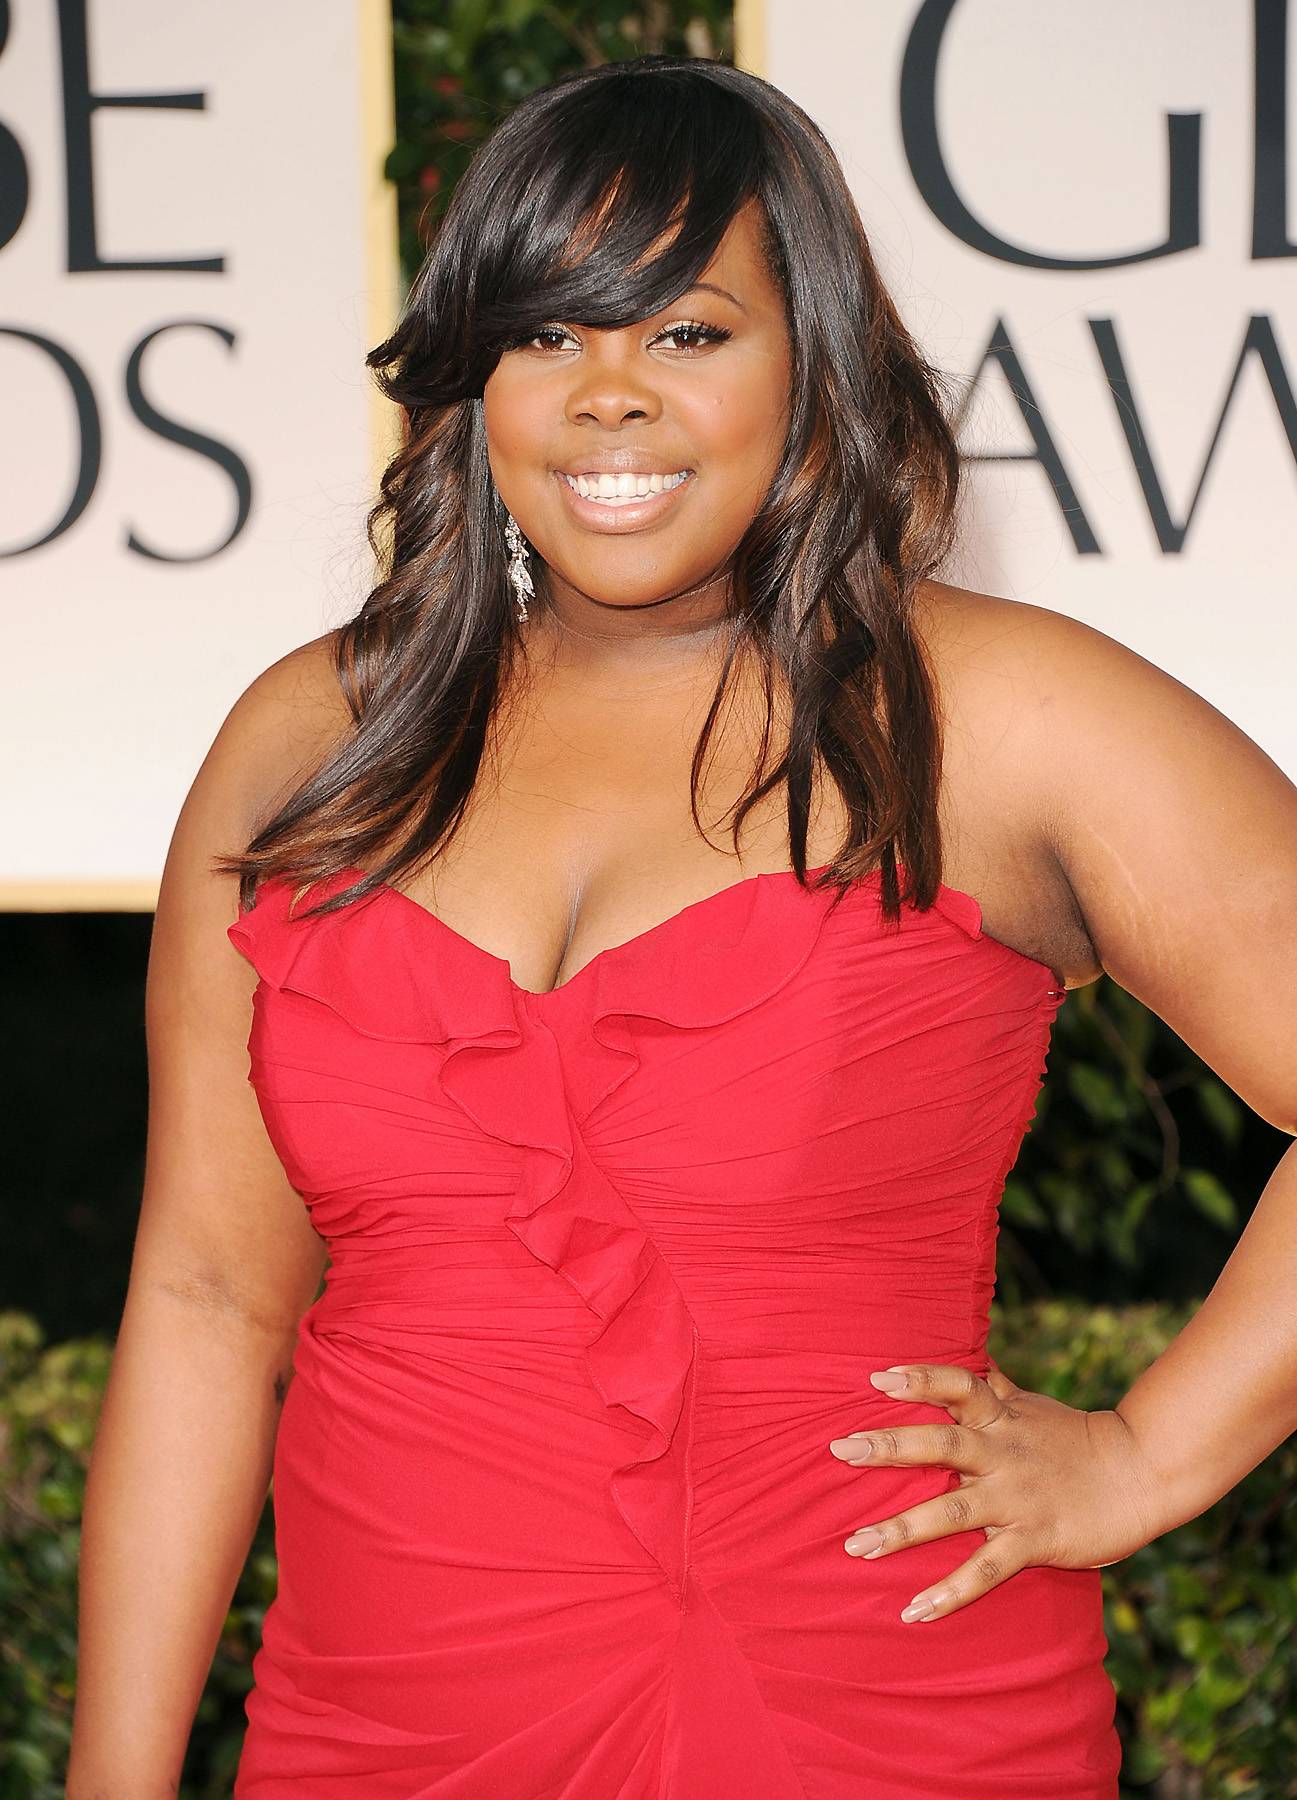 Performer: Amber Riley - After watching her show-stopping performances on the FOX hit series Glee, we're excited to see vocal powerhouse Amber Riley get to let loose on this year's Celebration Of Gospel.(Photo: Jason Merritt/Getty Images)